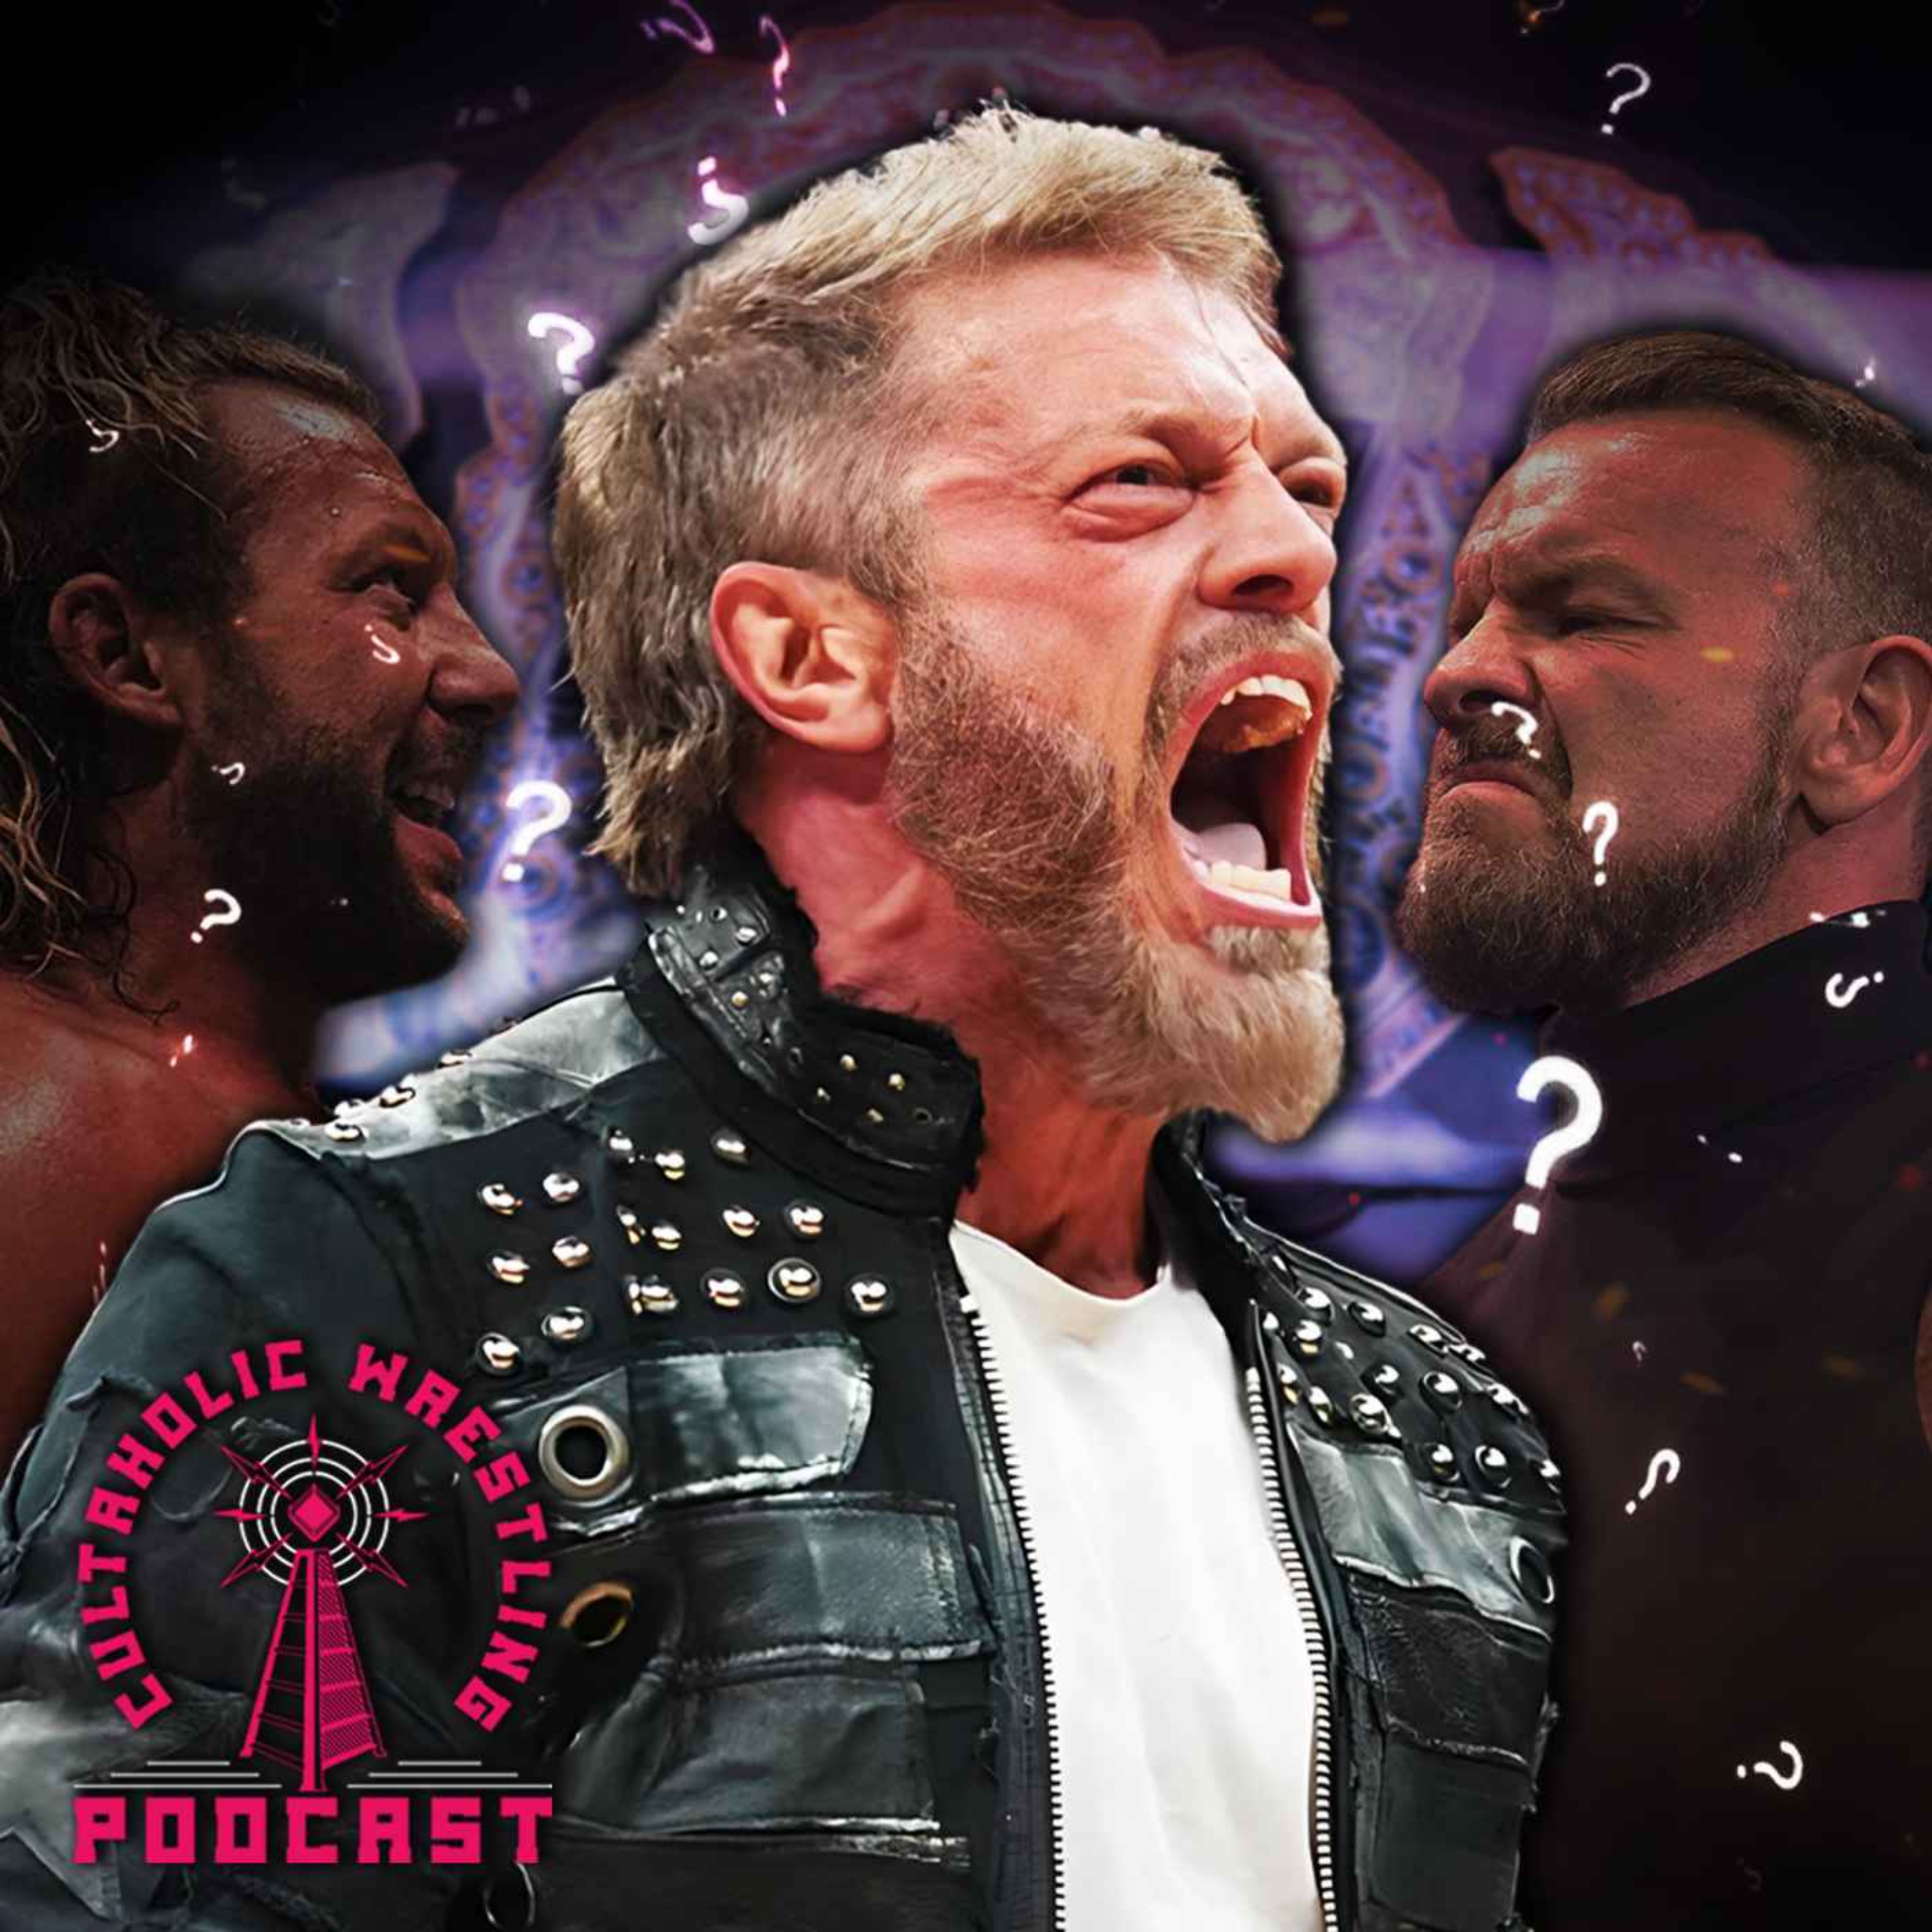 Cultaholic Wrestling Podcast 299 - How Should Edge's AEW Career Play Out?